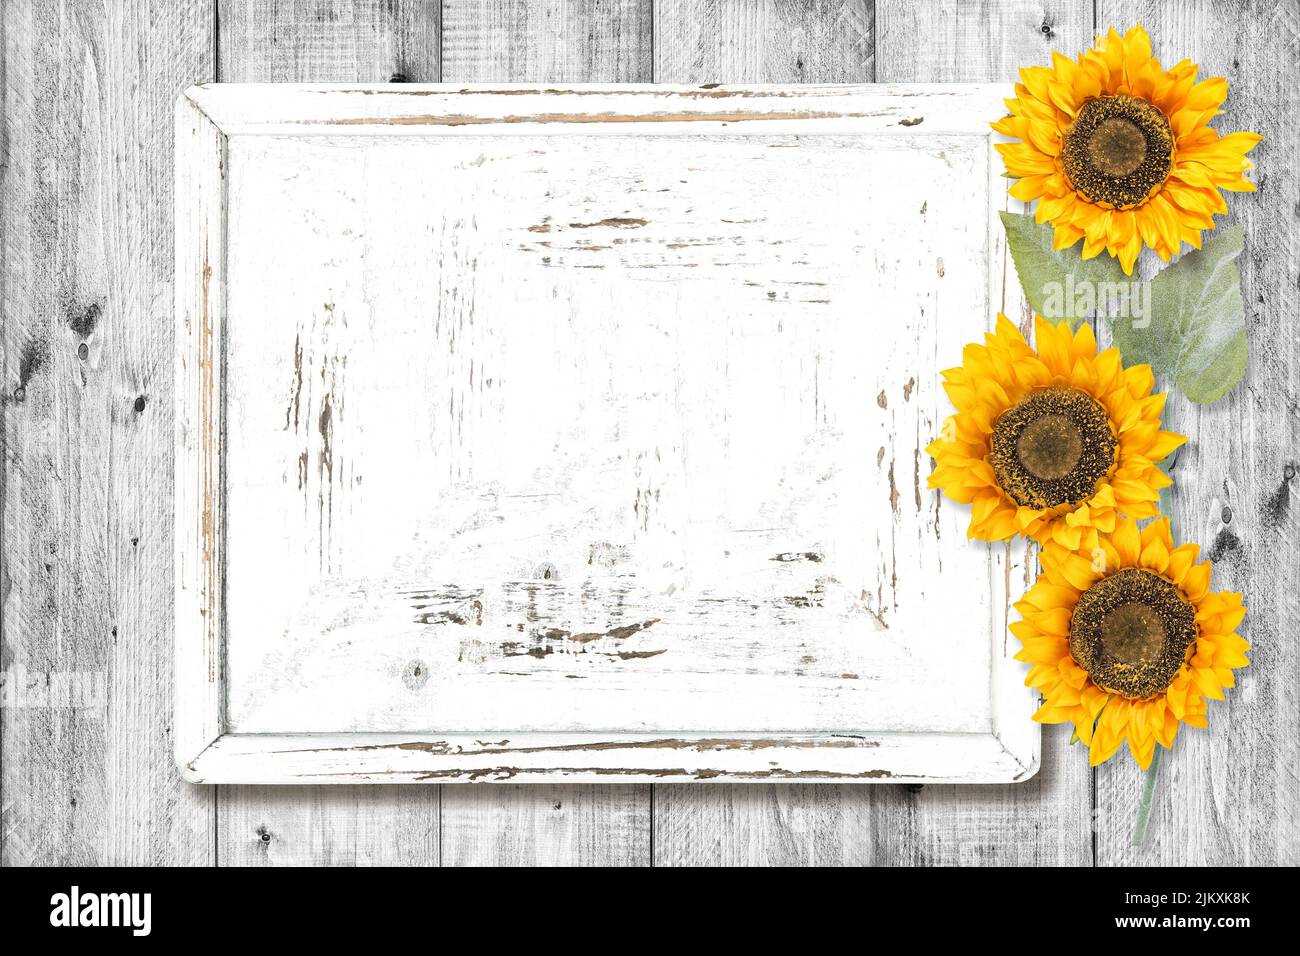 White wood sign board with sunflowers decoration. Rustic wooden texture background Stock Photo